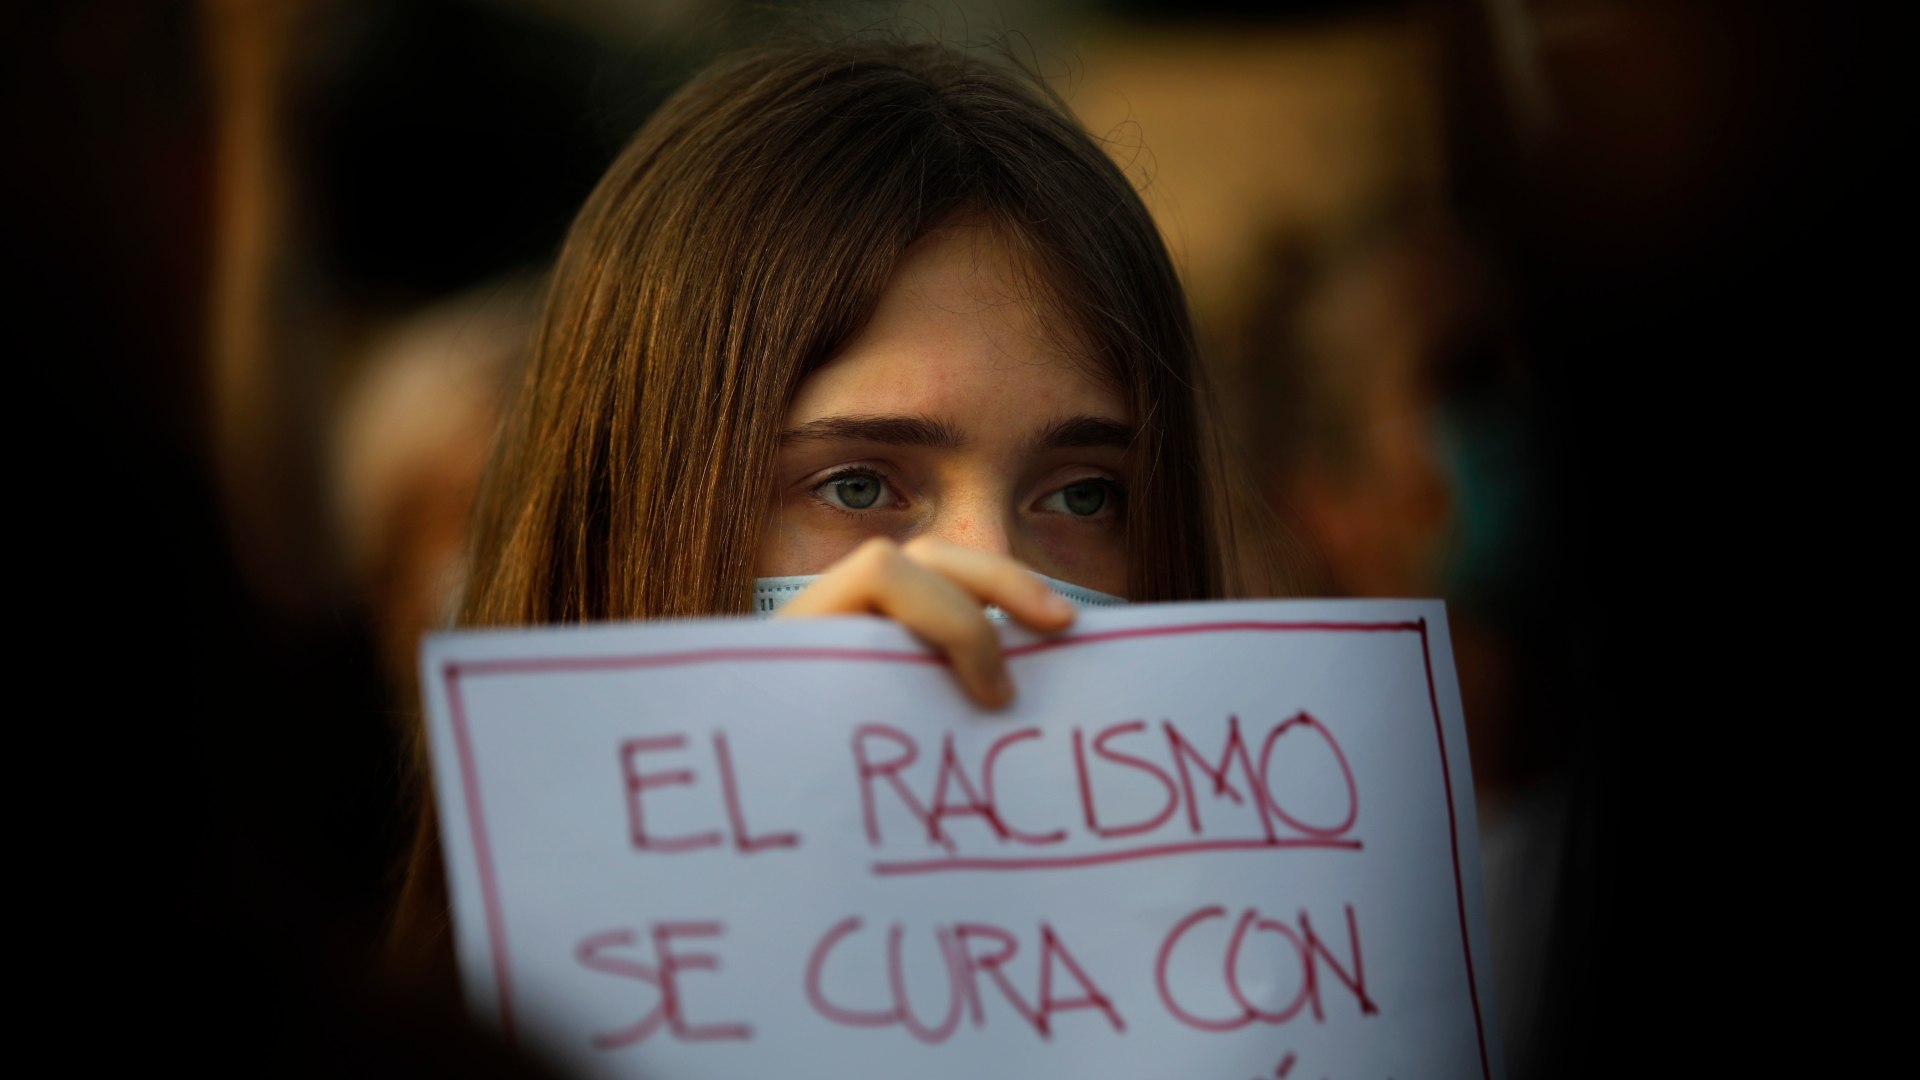 Racismo 'made in Spain'